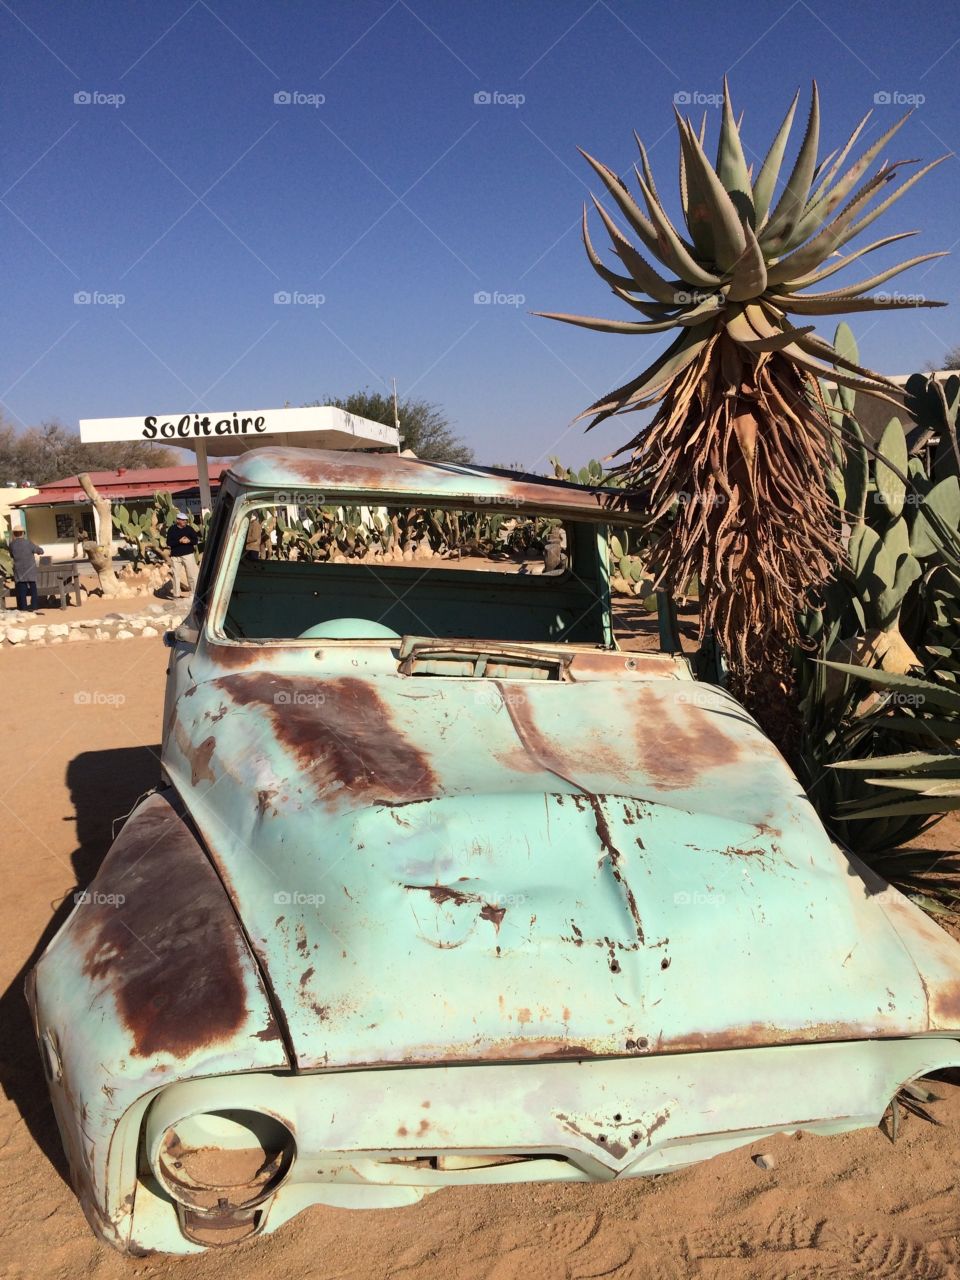 Abandoned rusty old car in desert landscape Solitaire, Namibia 